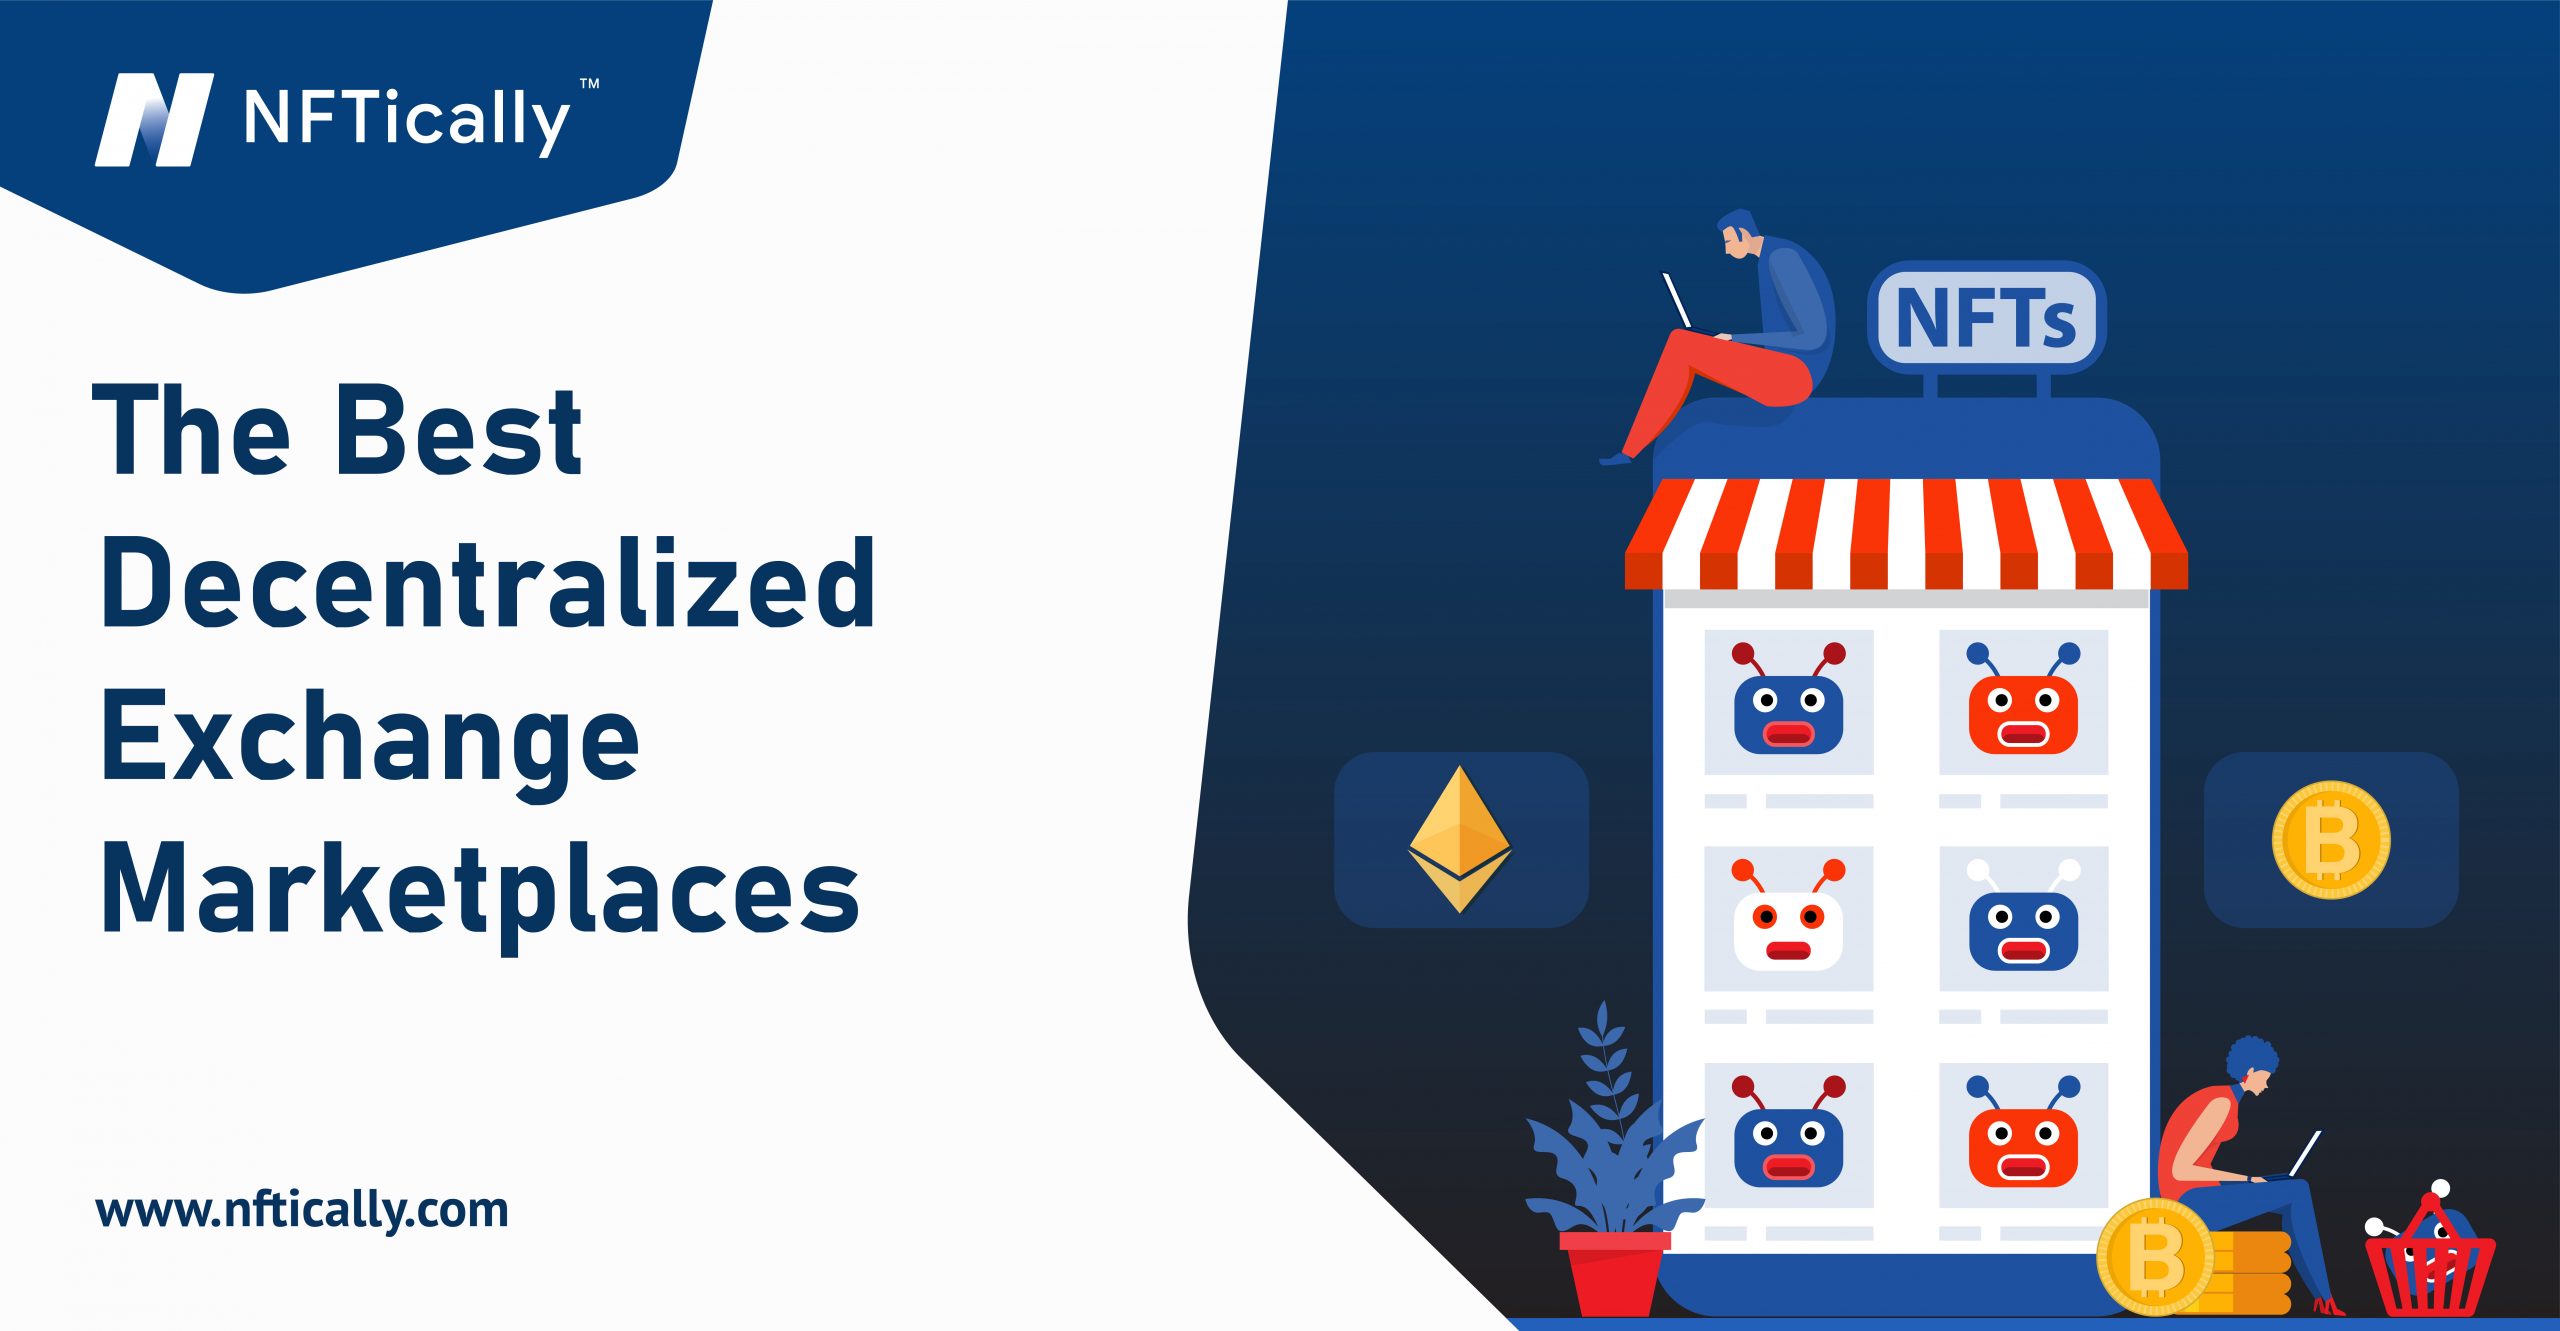 The Best Decentralized Exchange Marketplaces in 2021